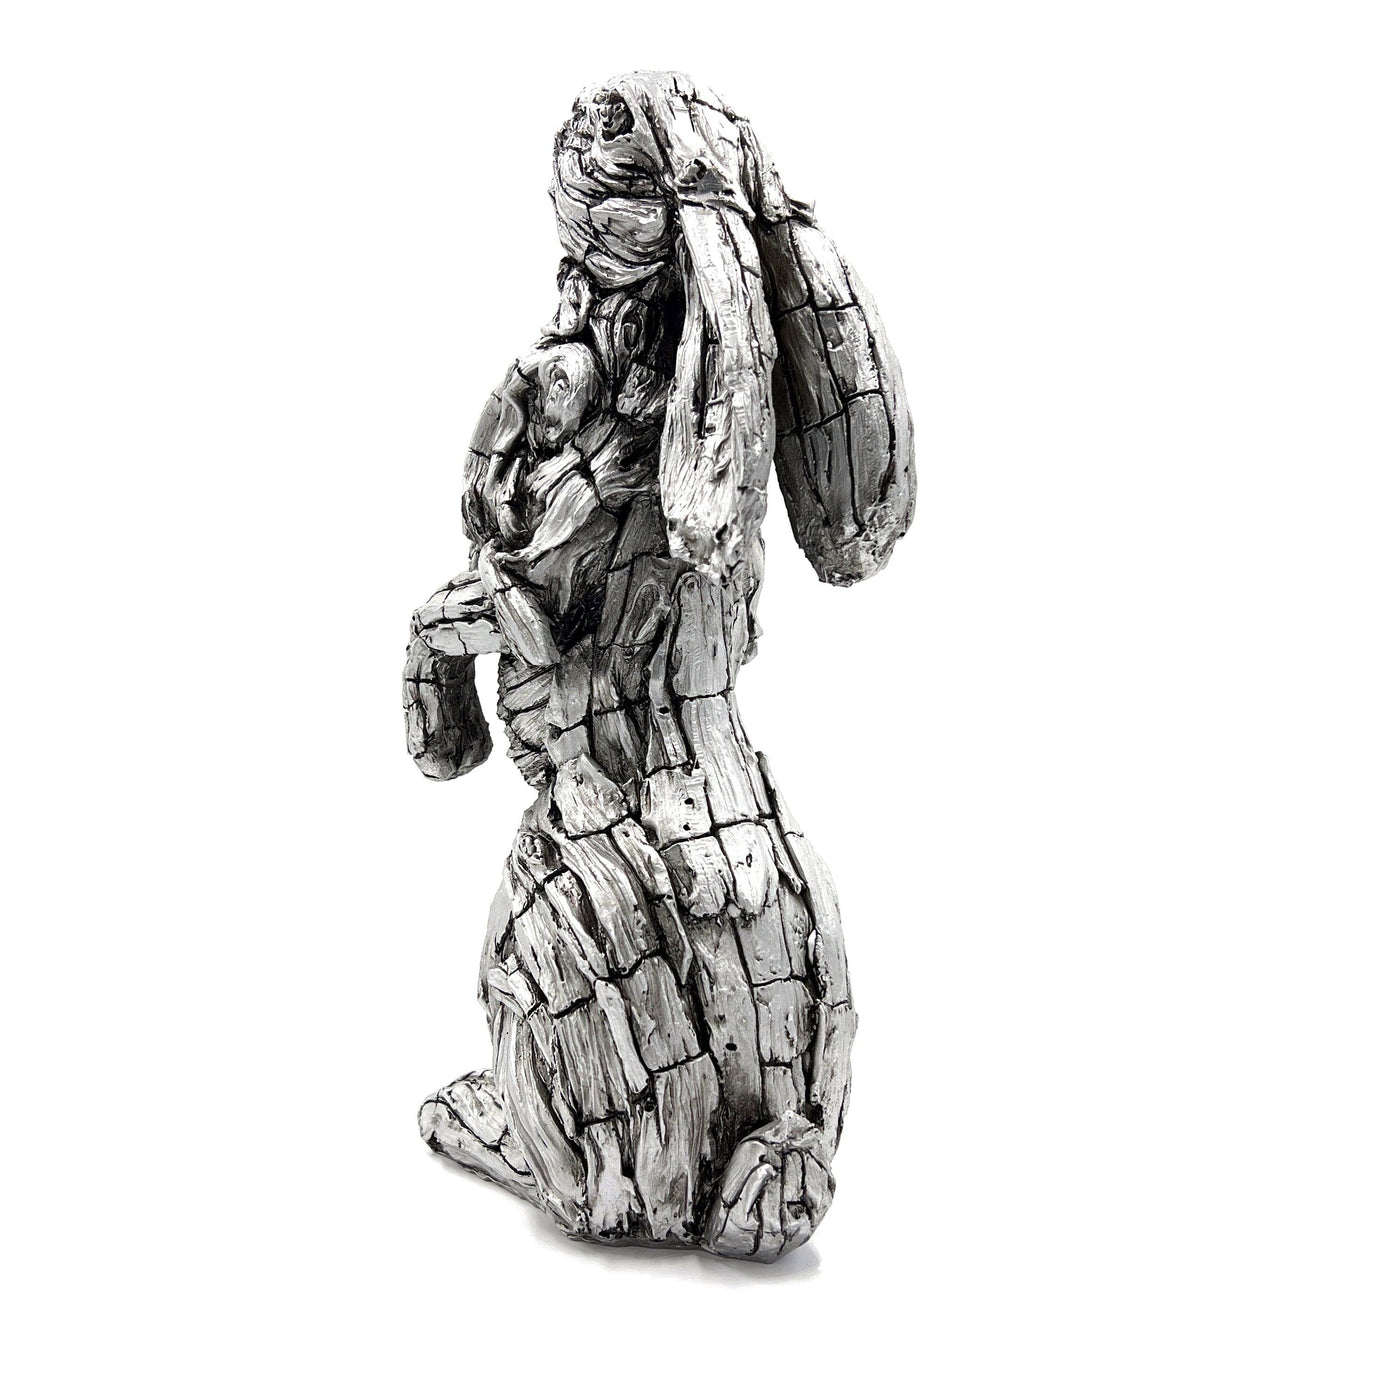 Silver Hare Driftwood Style Ornament - TwoBeeps.co.uk